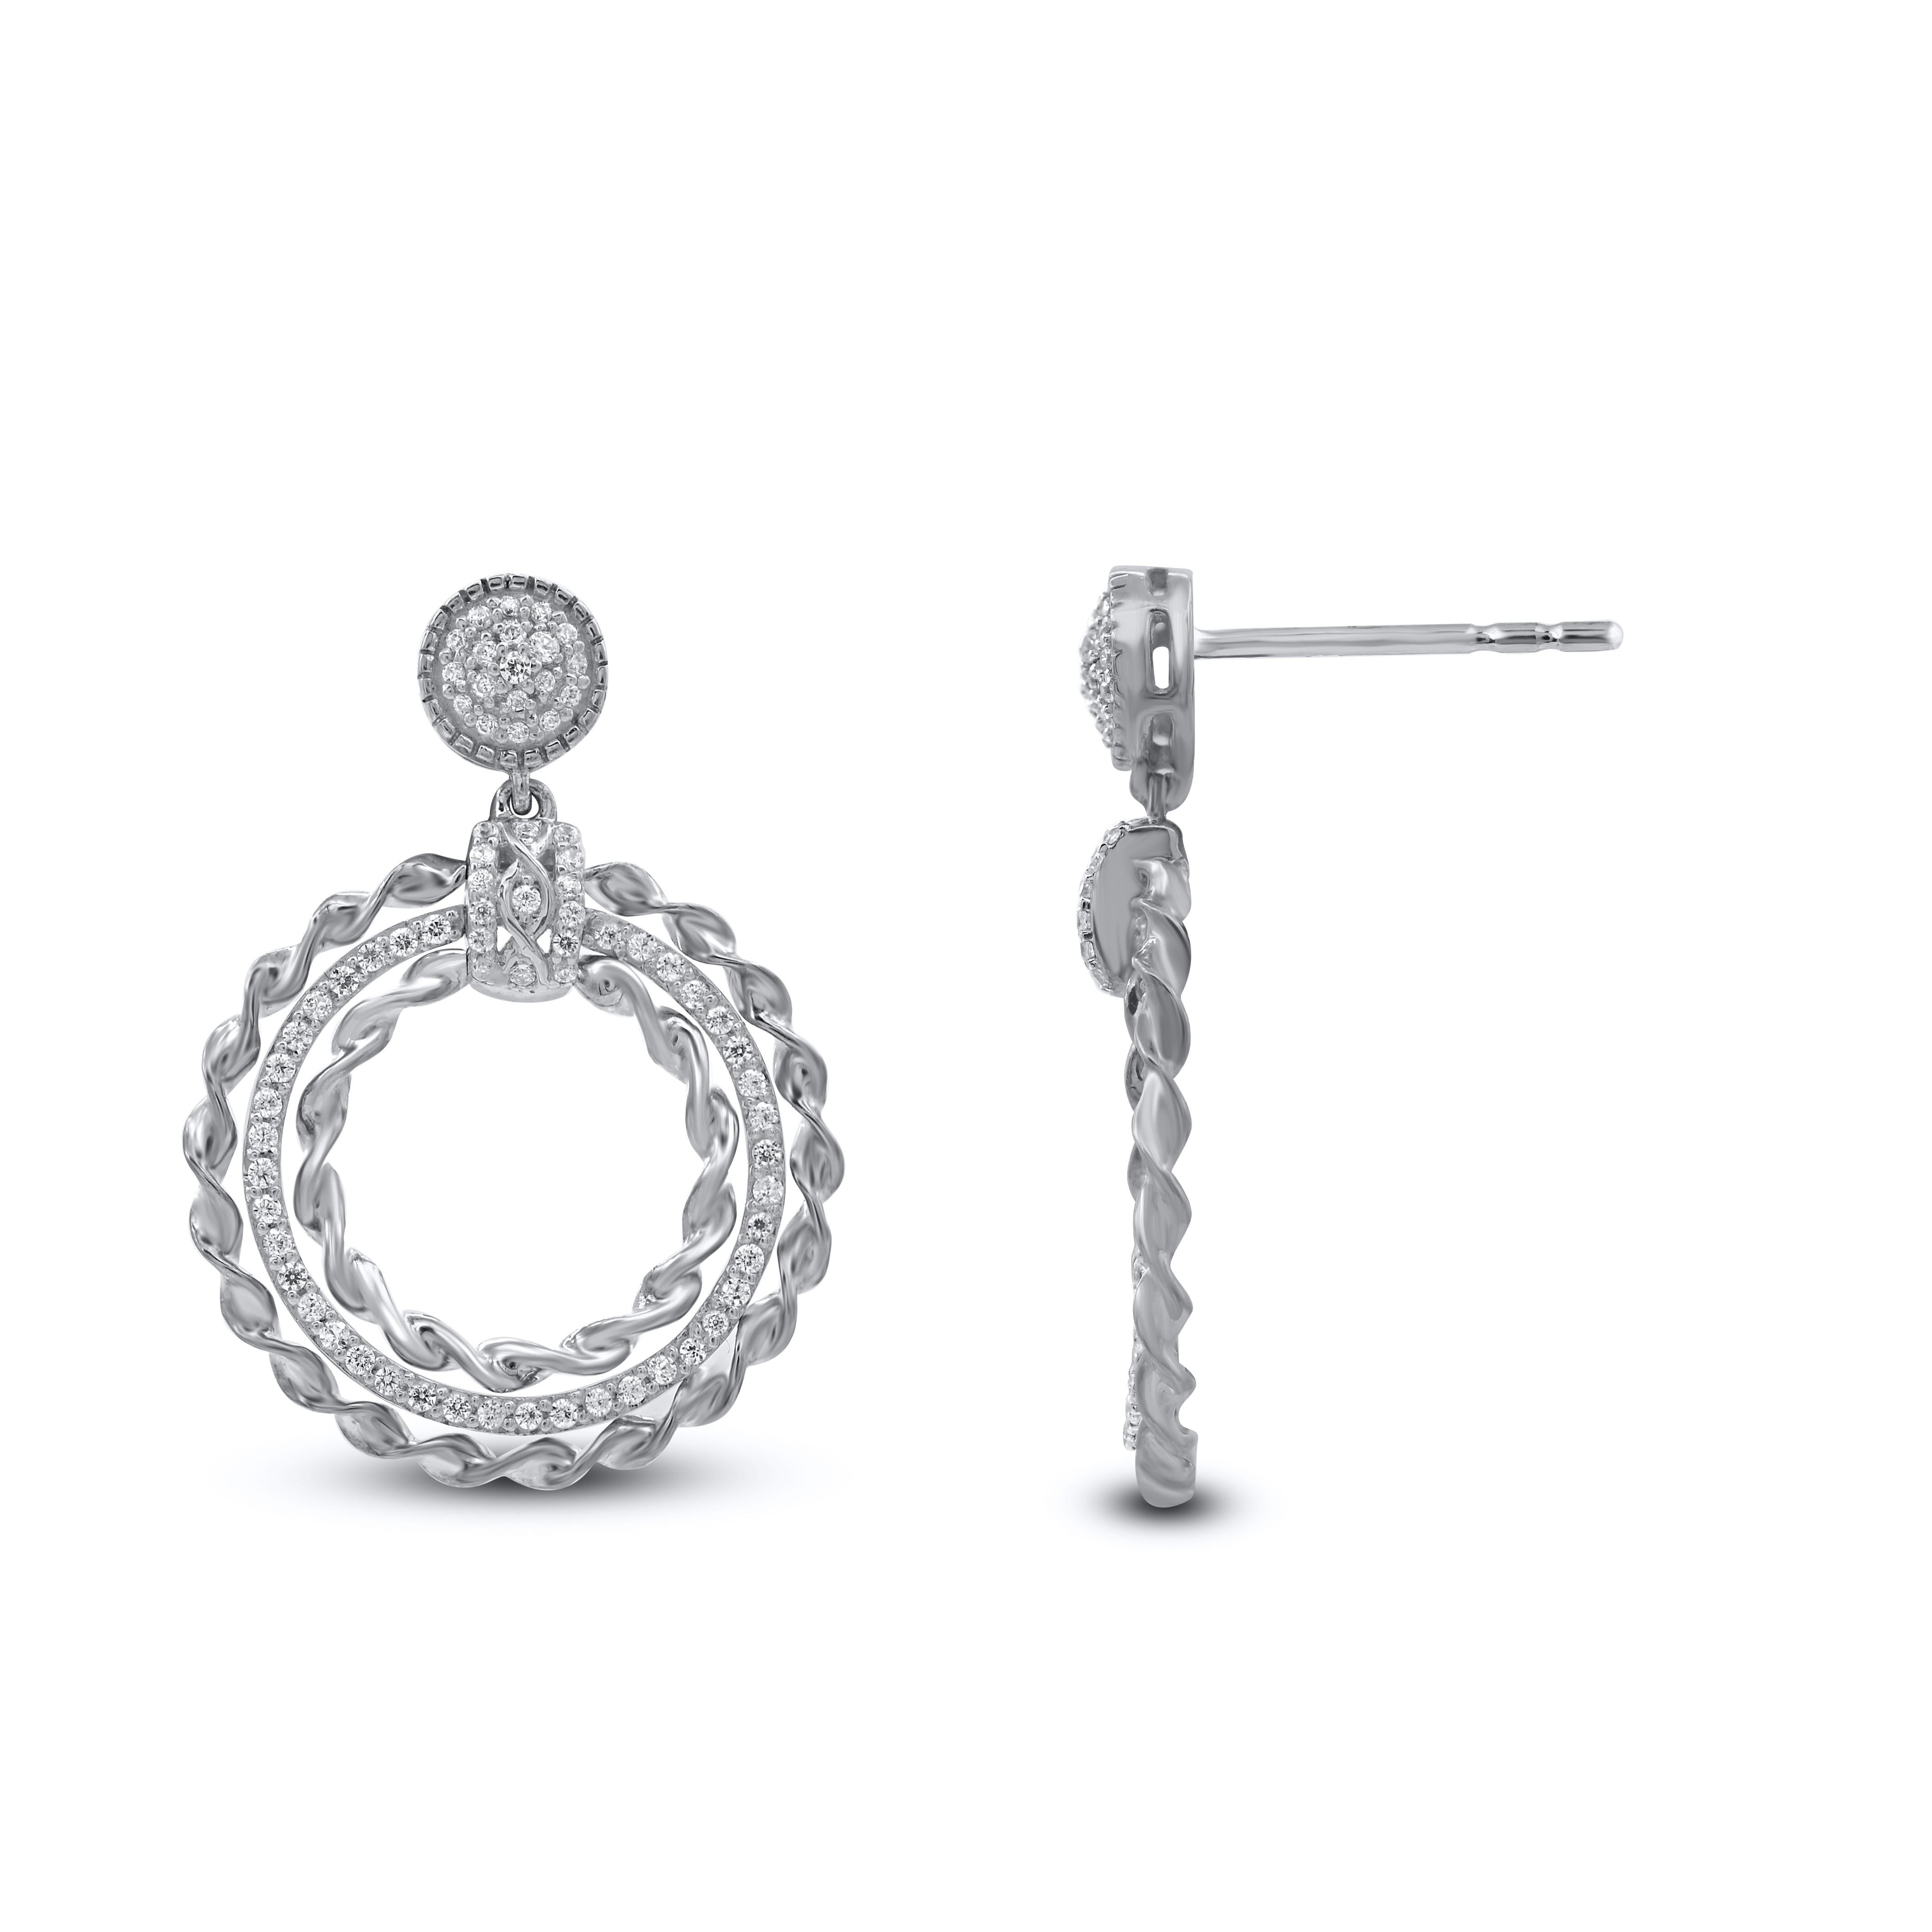 The perfect complement to her classic style, this diamond dangle earrings shines with your happily ever after. These earrings feature dazzling with 148 single cut round diamond set in prong setting. Total diamond weight is 0.50 carat. These earrings